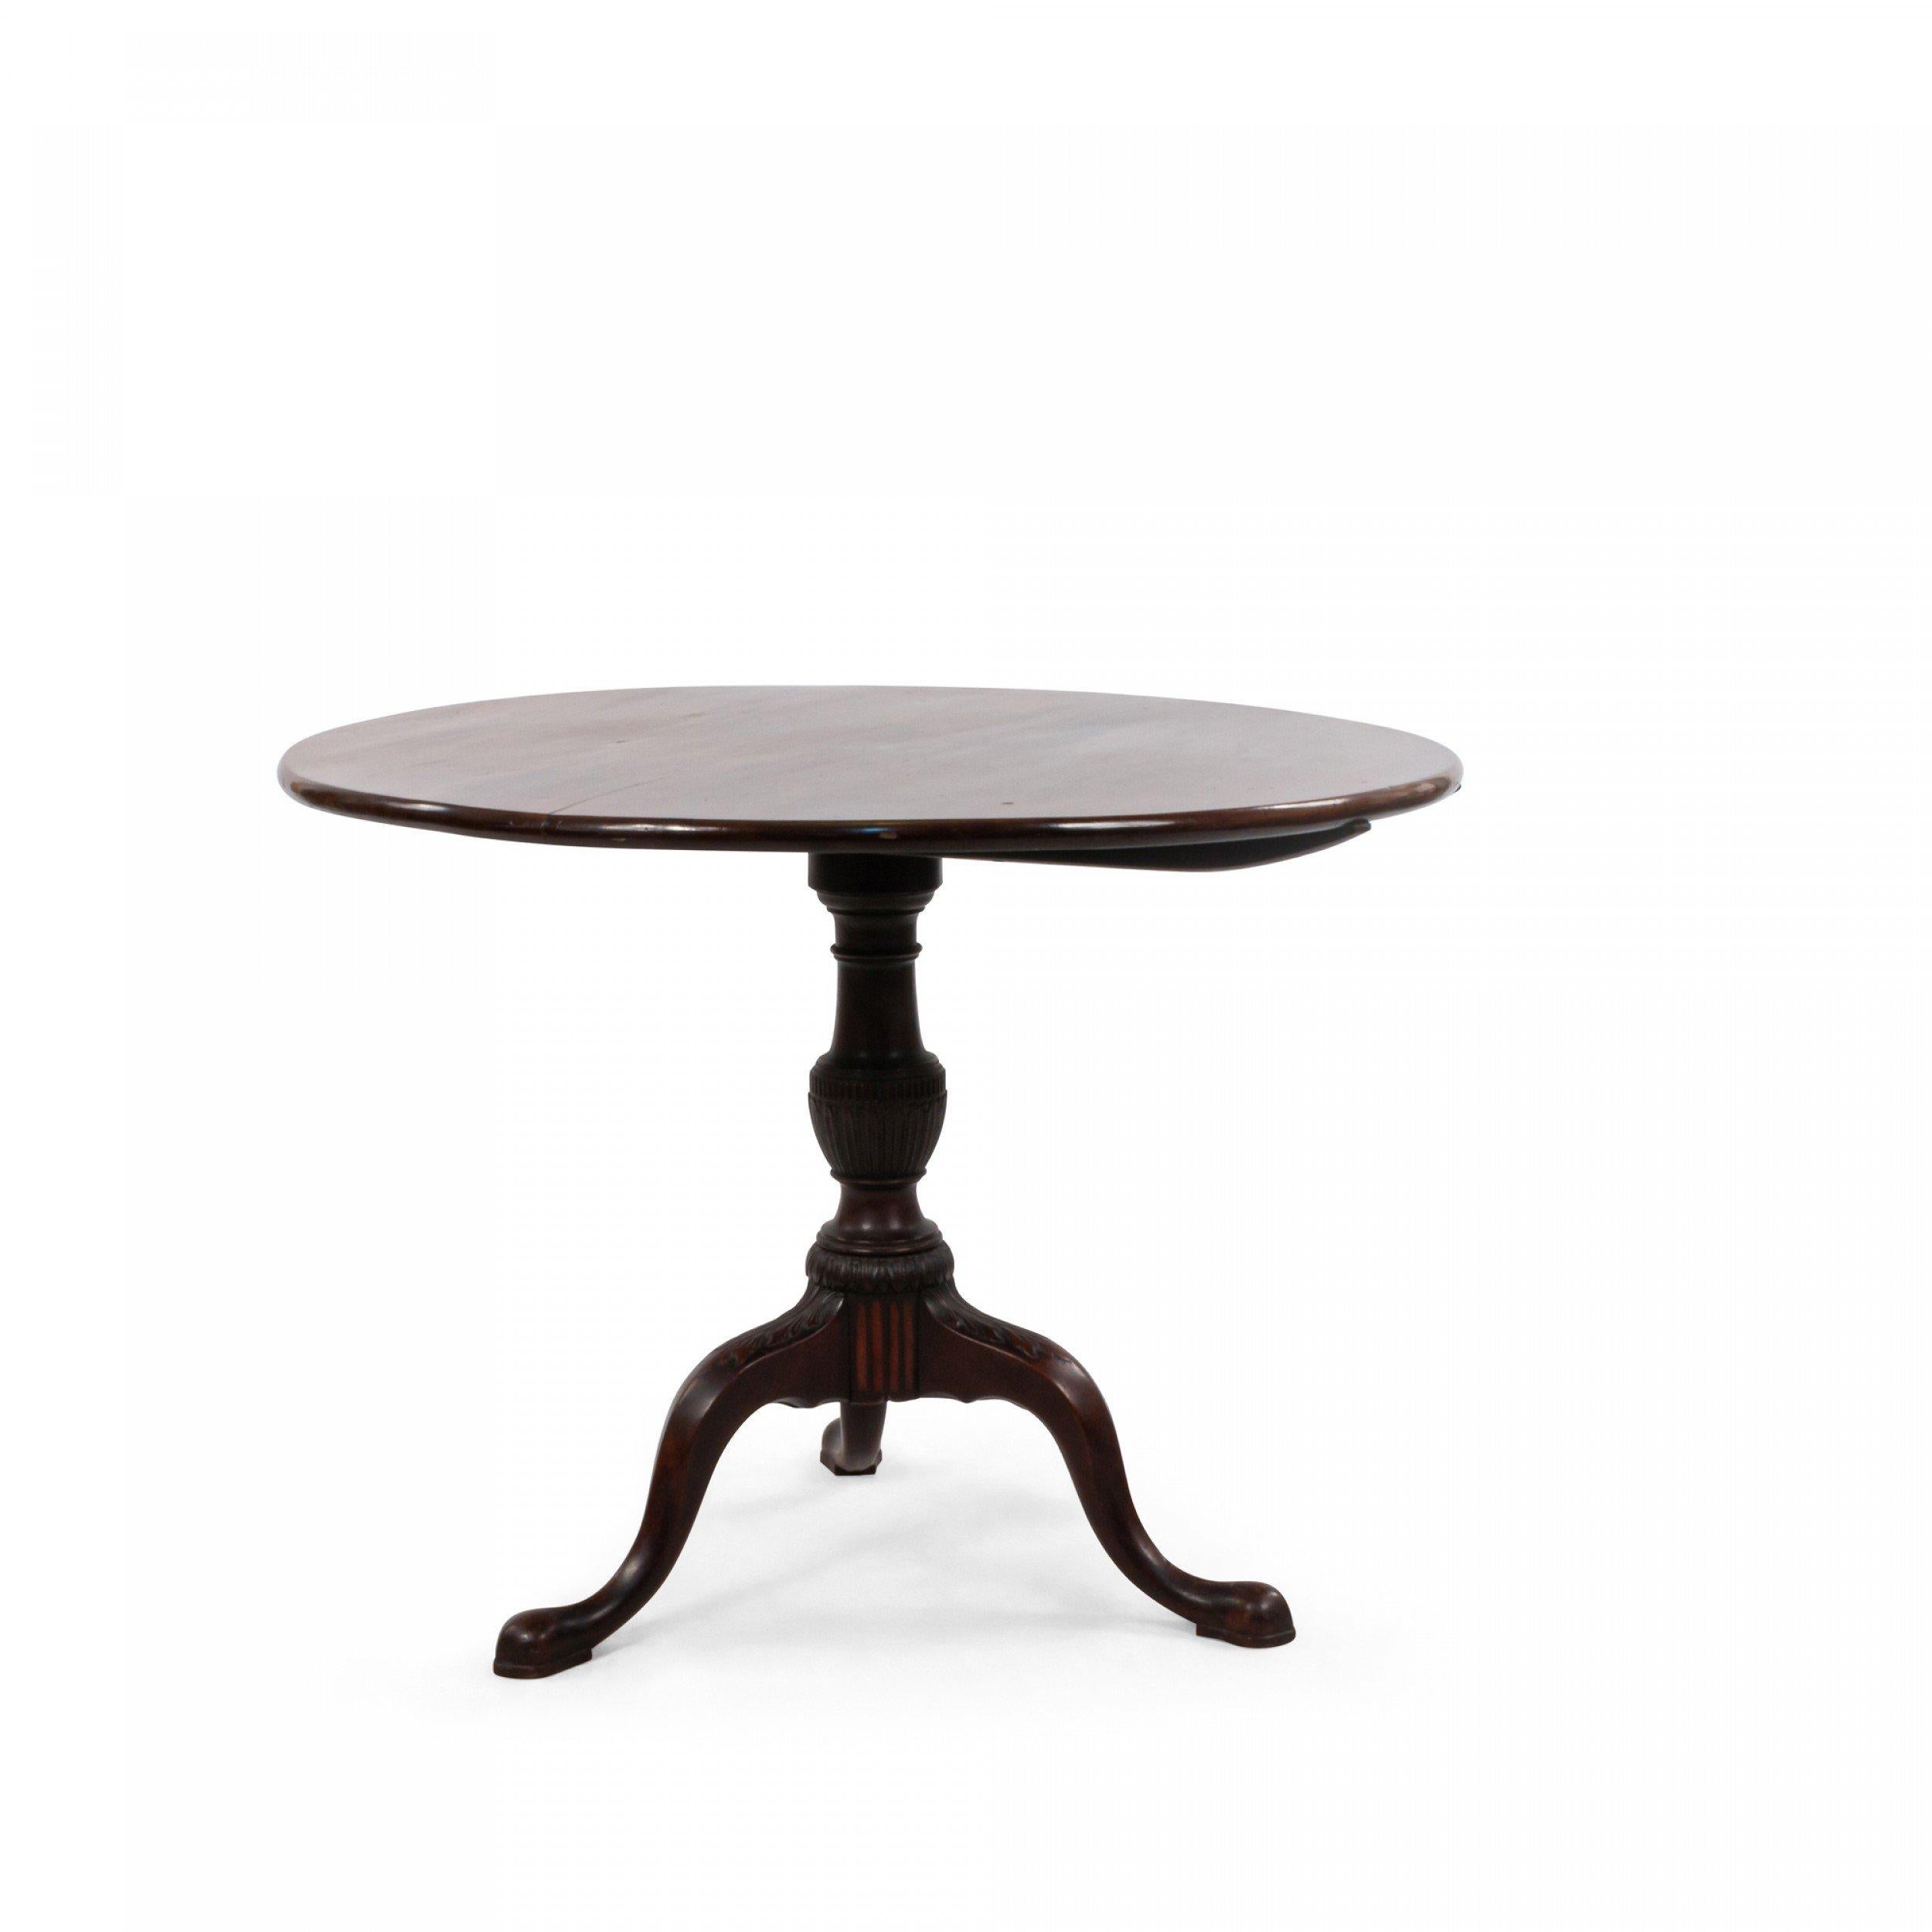 Queen Anne, possibly American, (18th Century) mahogany round tilt top table supported on a pedestal with three carved cabriole legs with pad feet.
  